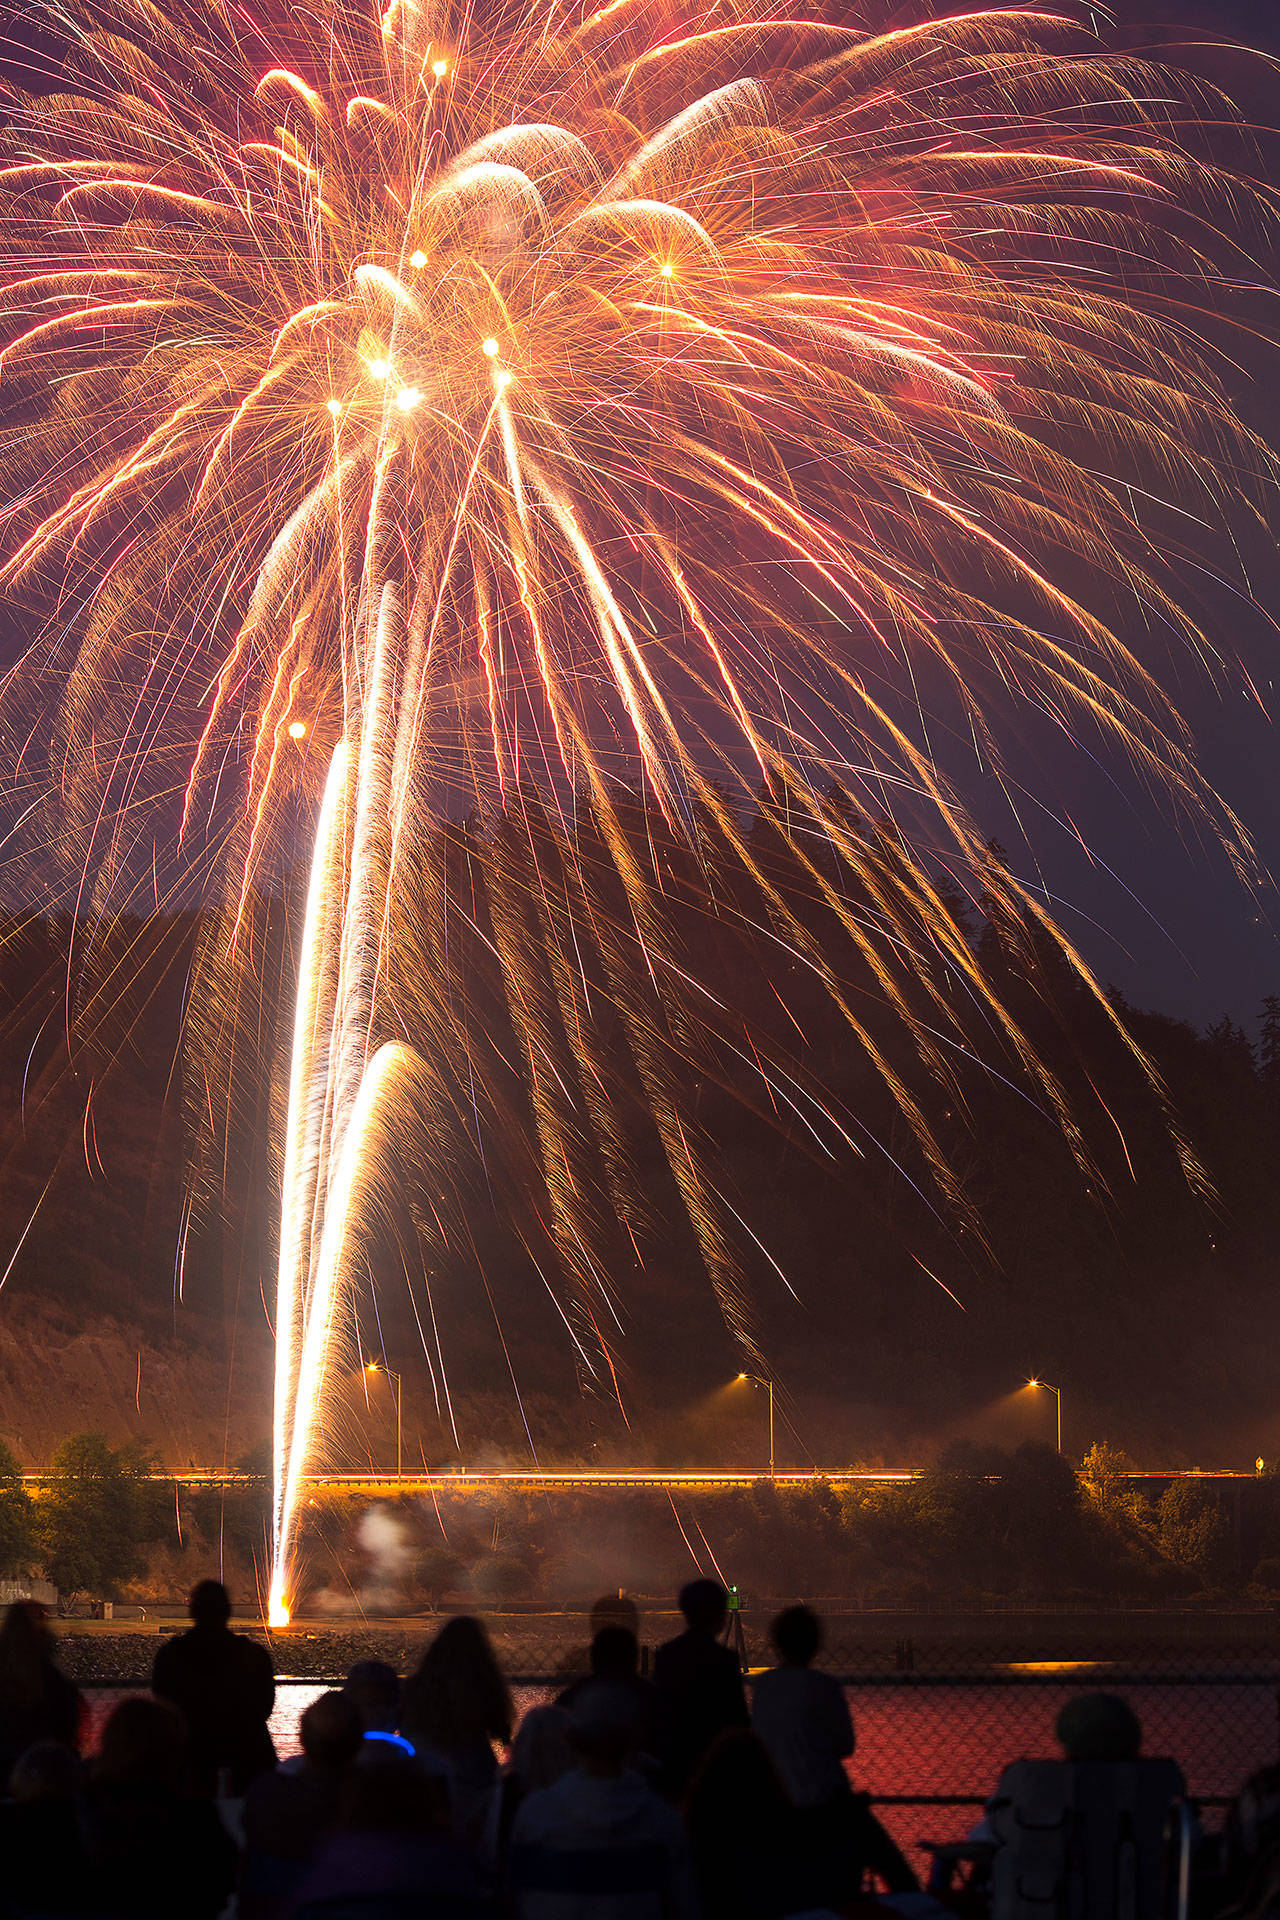 THE DAILY WORLD | File photo 
Elma and Cosmopolis have banned the use of personal fireworks due to fire danger through July 5. There will be a professional fireworks show July 4 in Aberdeen over the Chehalis River.